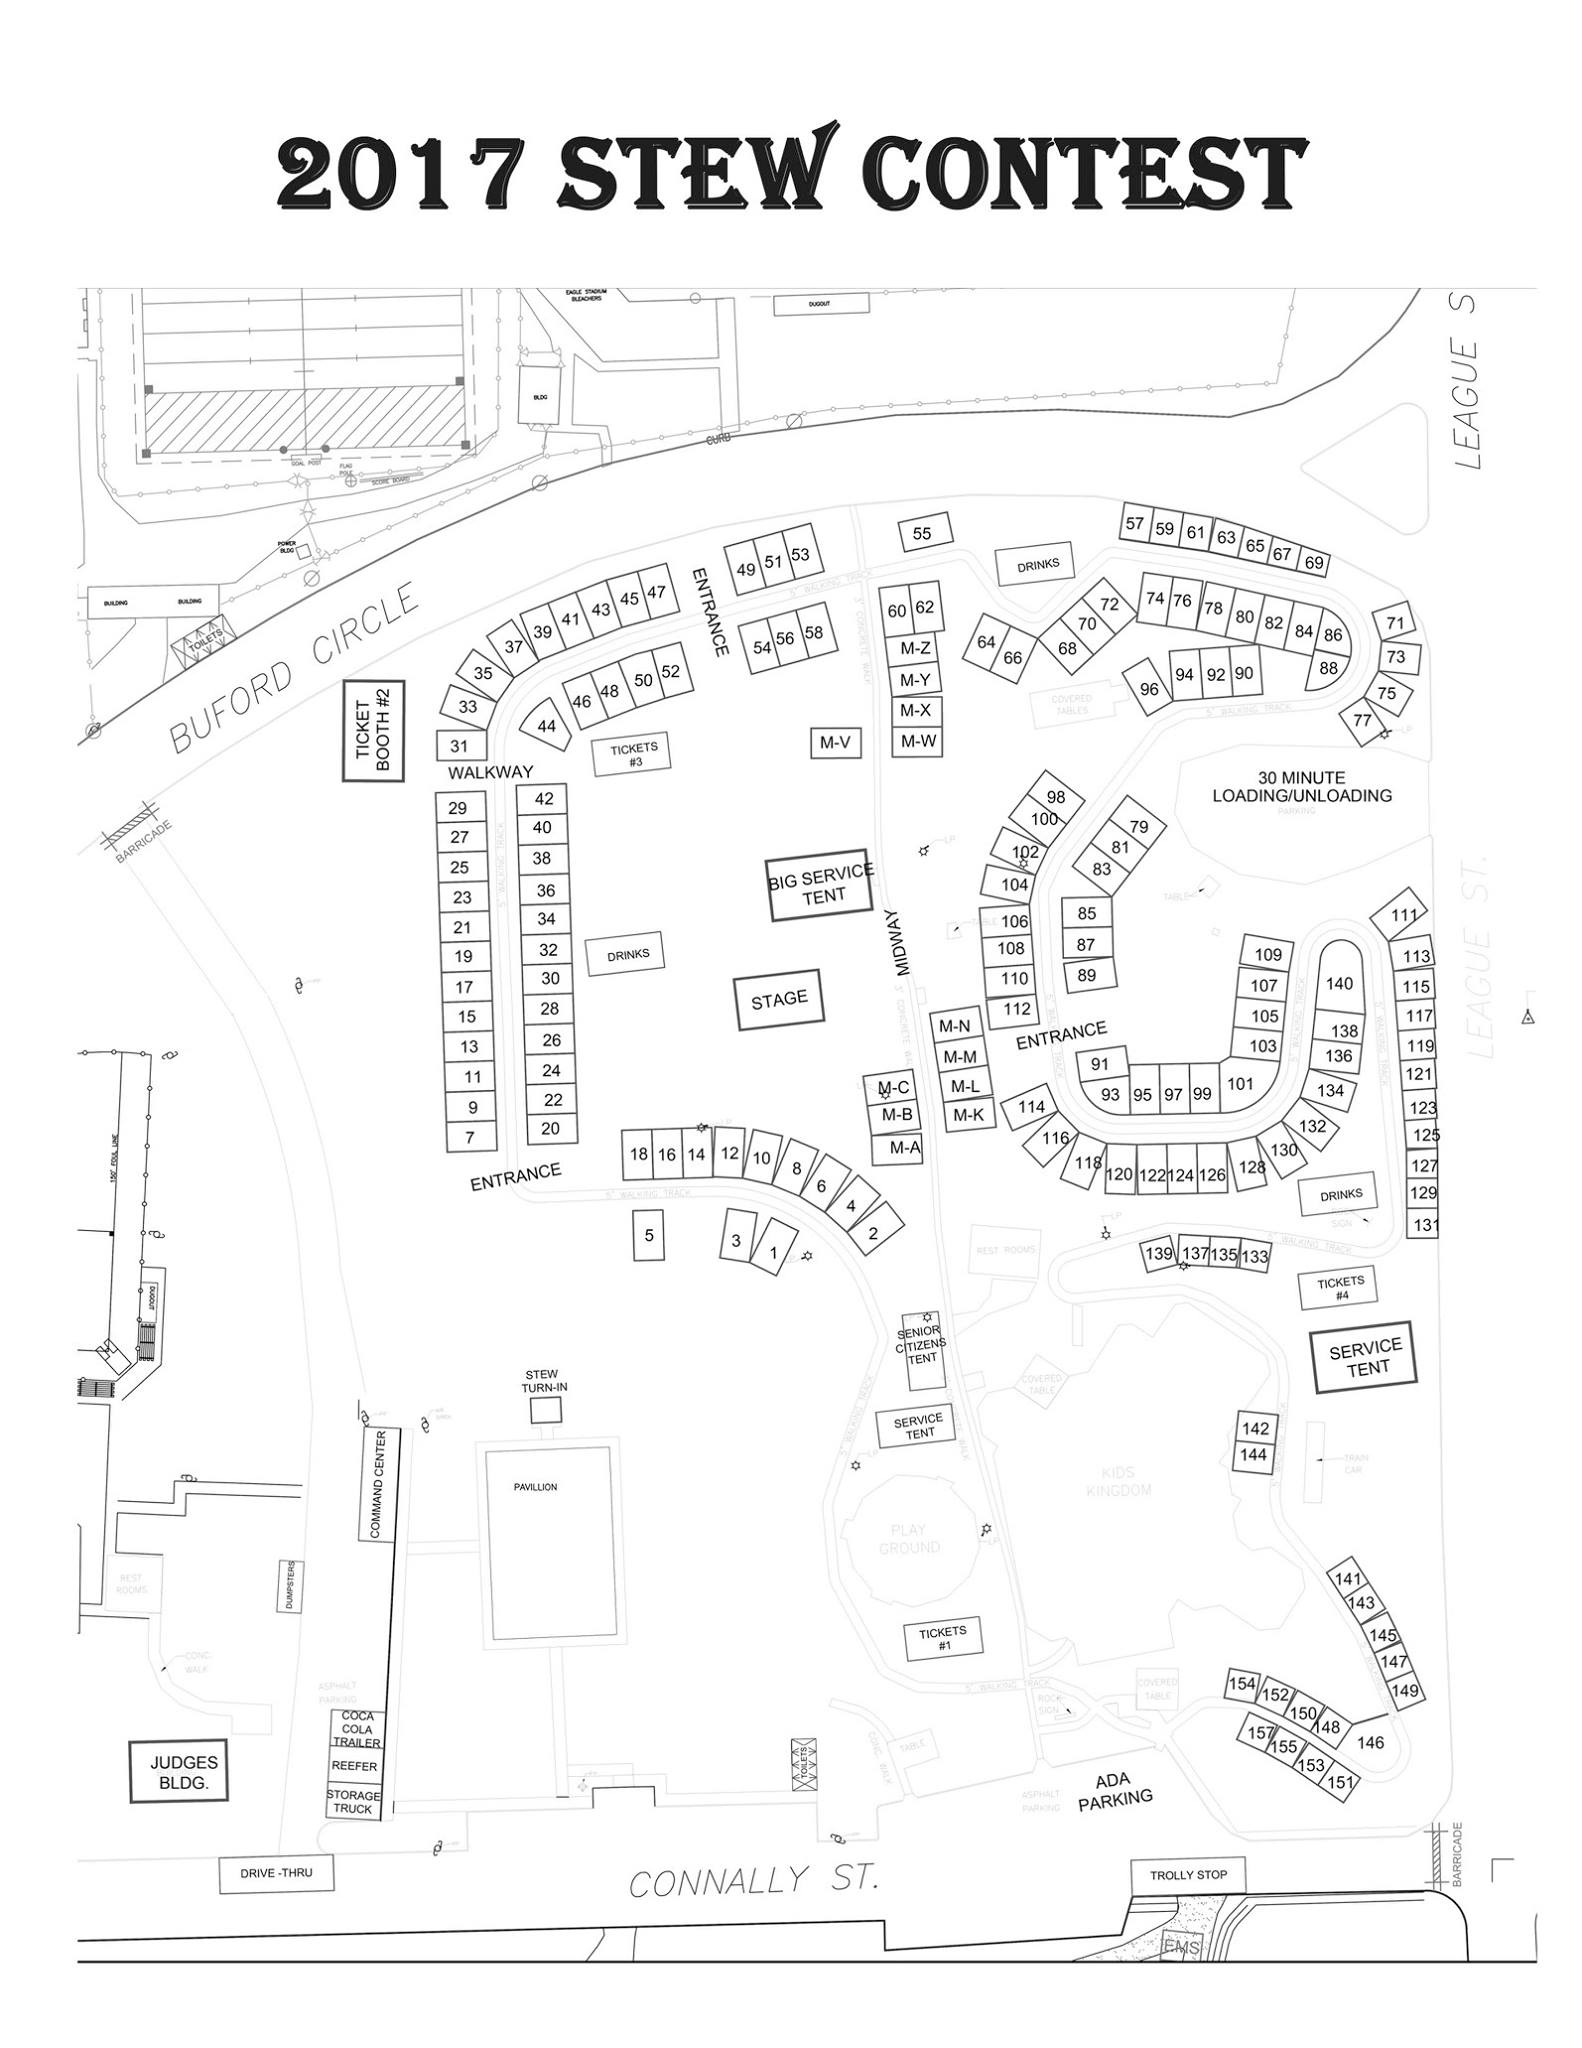 48th Annual Hopkins County Stew Contest Site Map